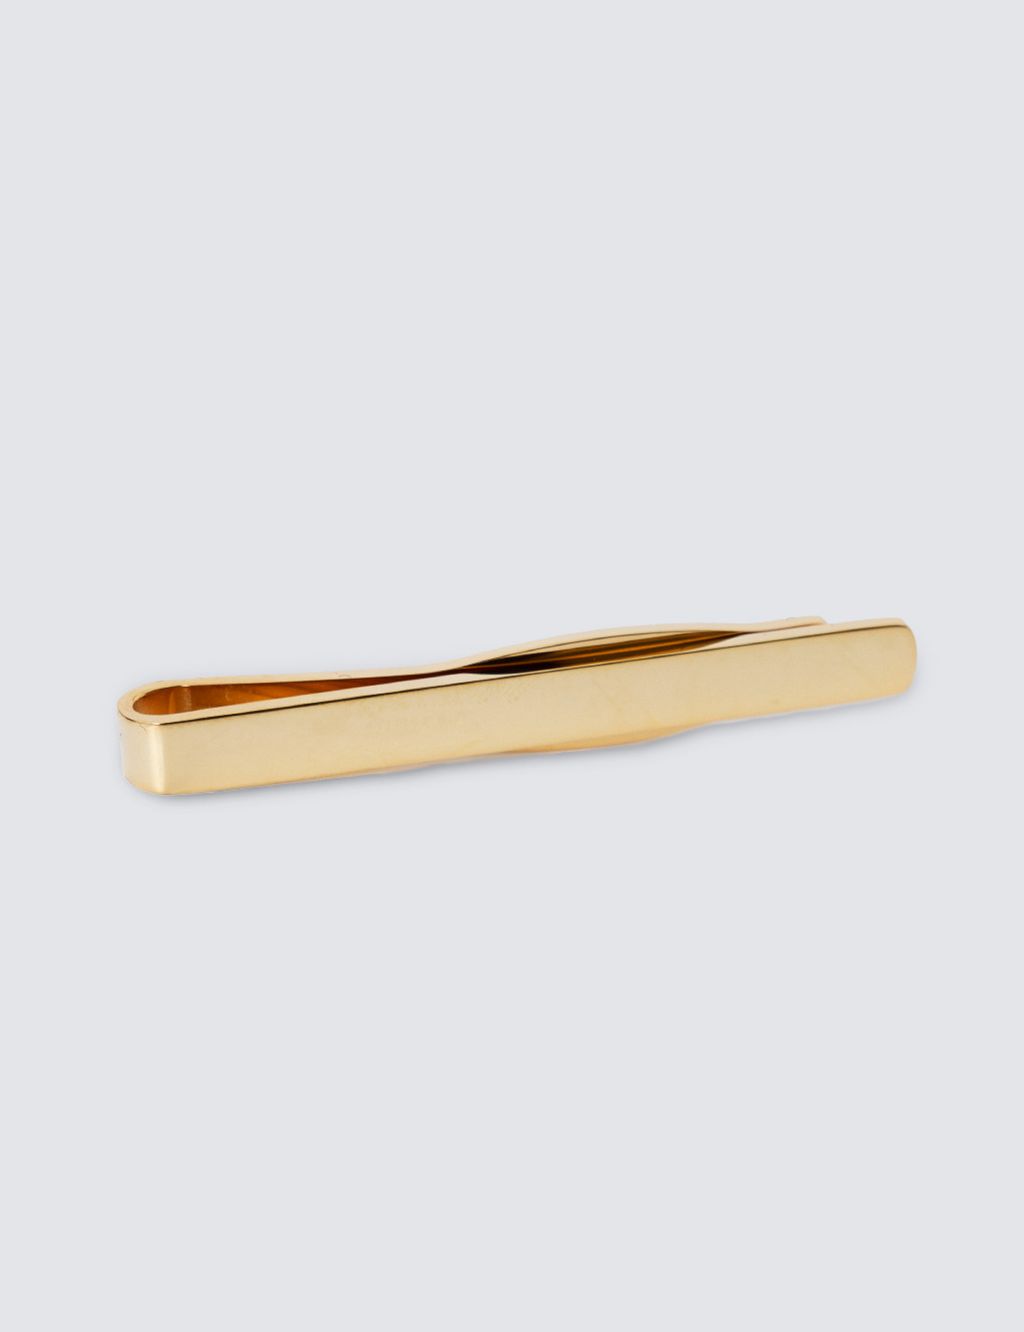 Gold Plated Tie Slide image 1